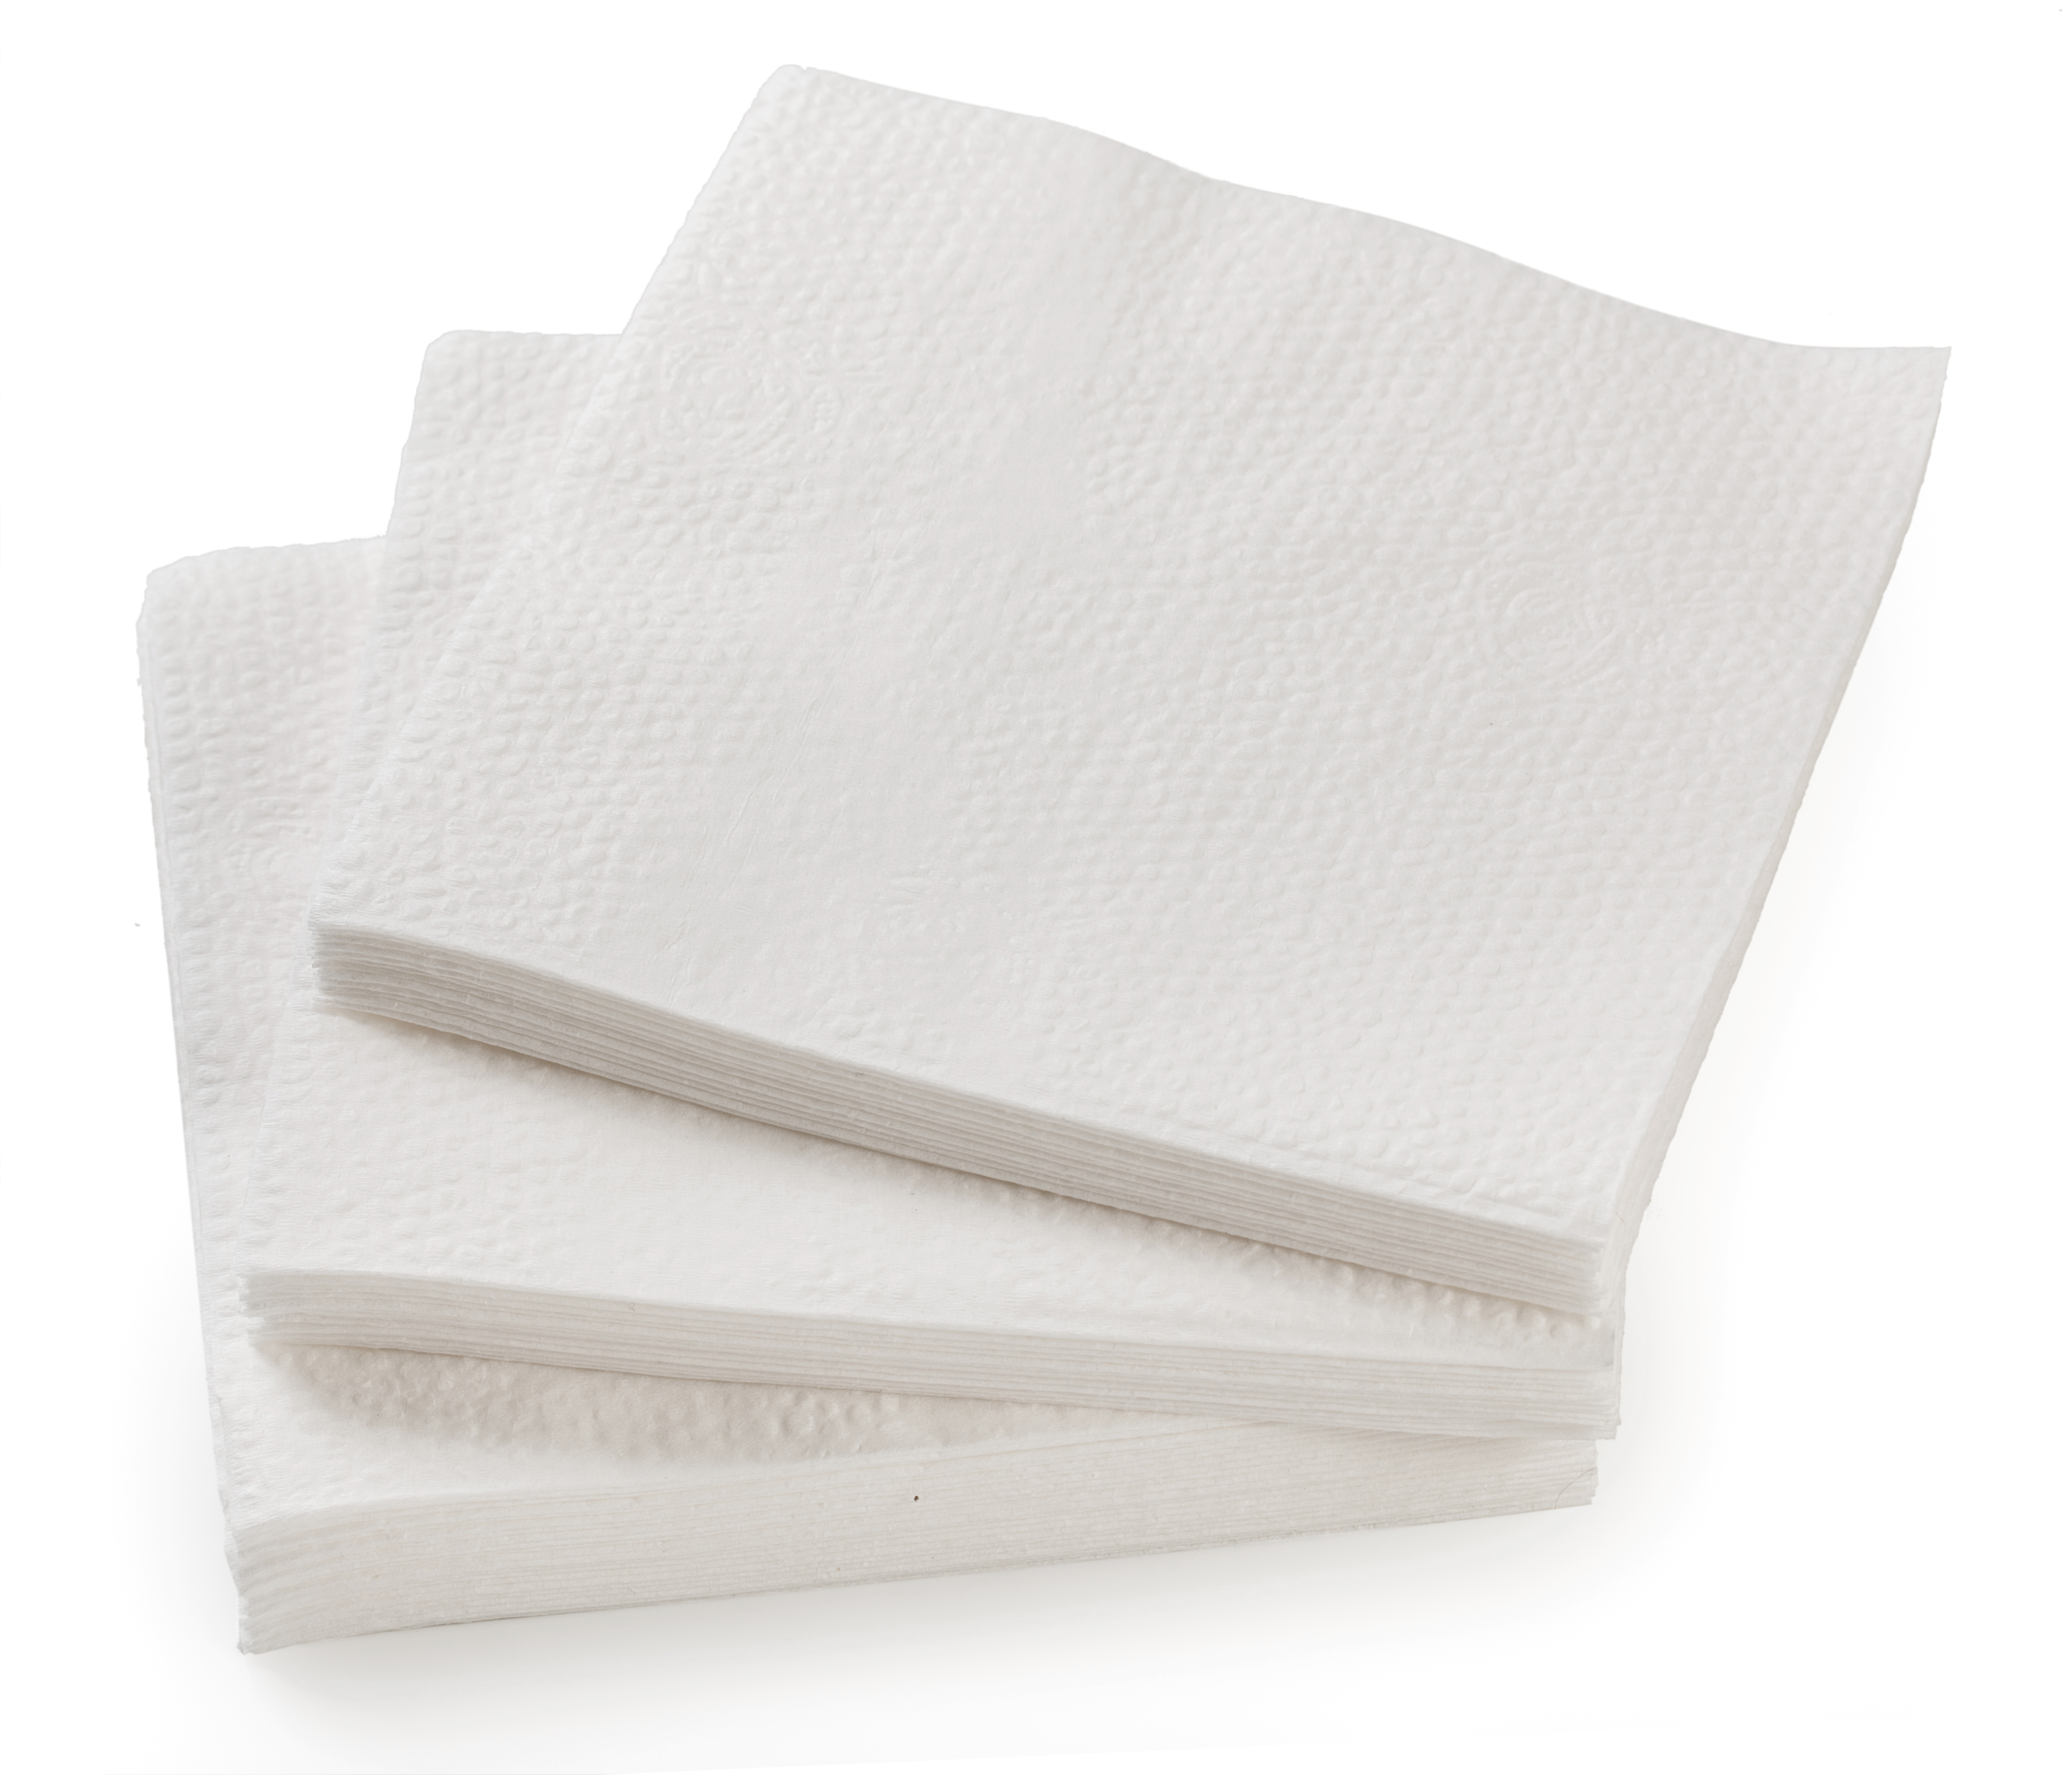 2 Ply Lunch Napkins- Case of 6,000ct